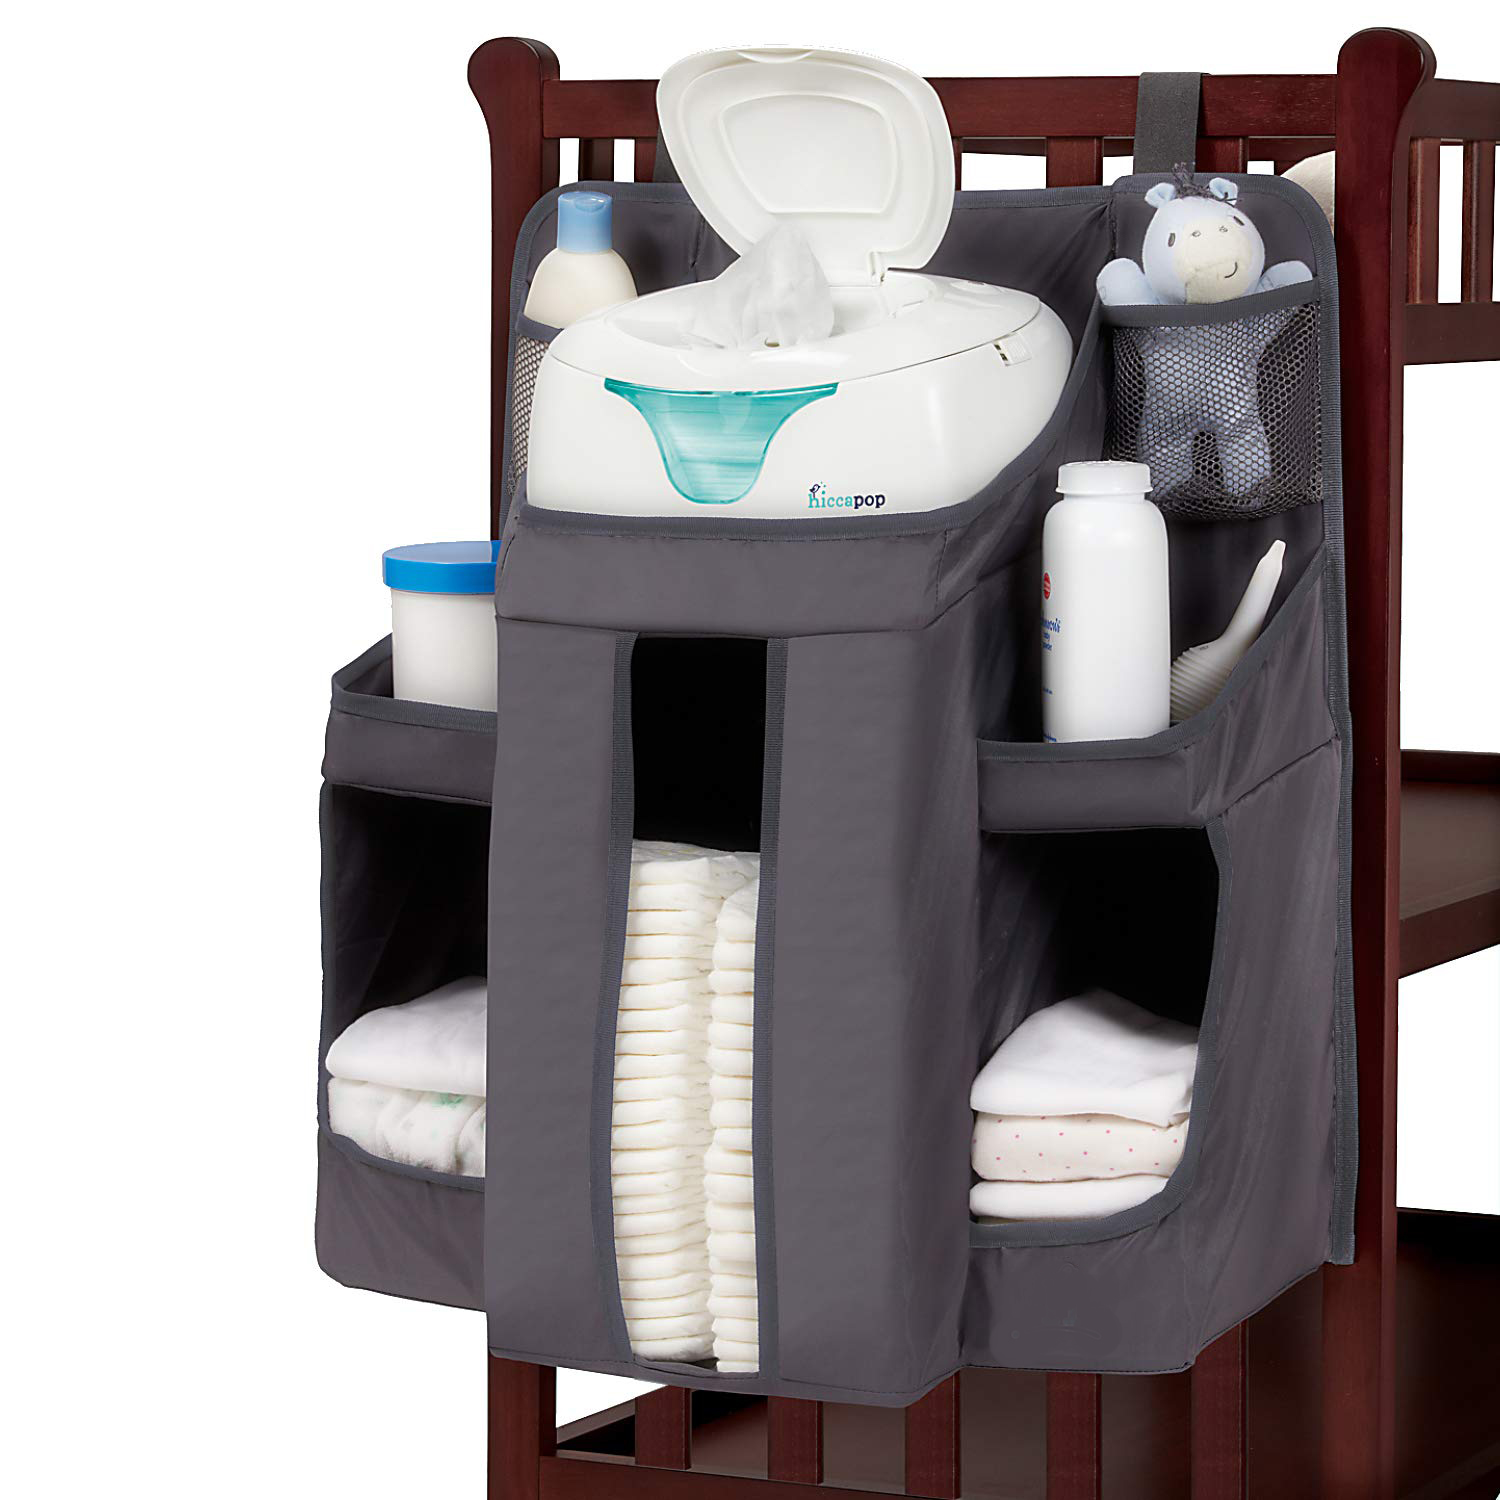 Acplaypen.com Nursery Organizer and Baby Diaper Caddy | Hanging Diaper Organization Storage for Baby Essentials | Hang on Crib, Changing Table or Wall